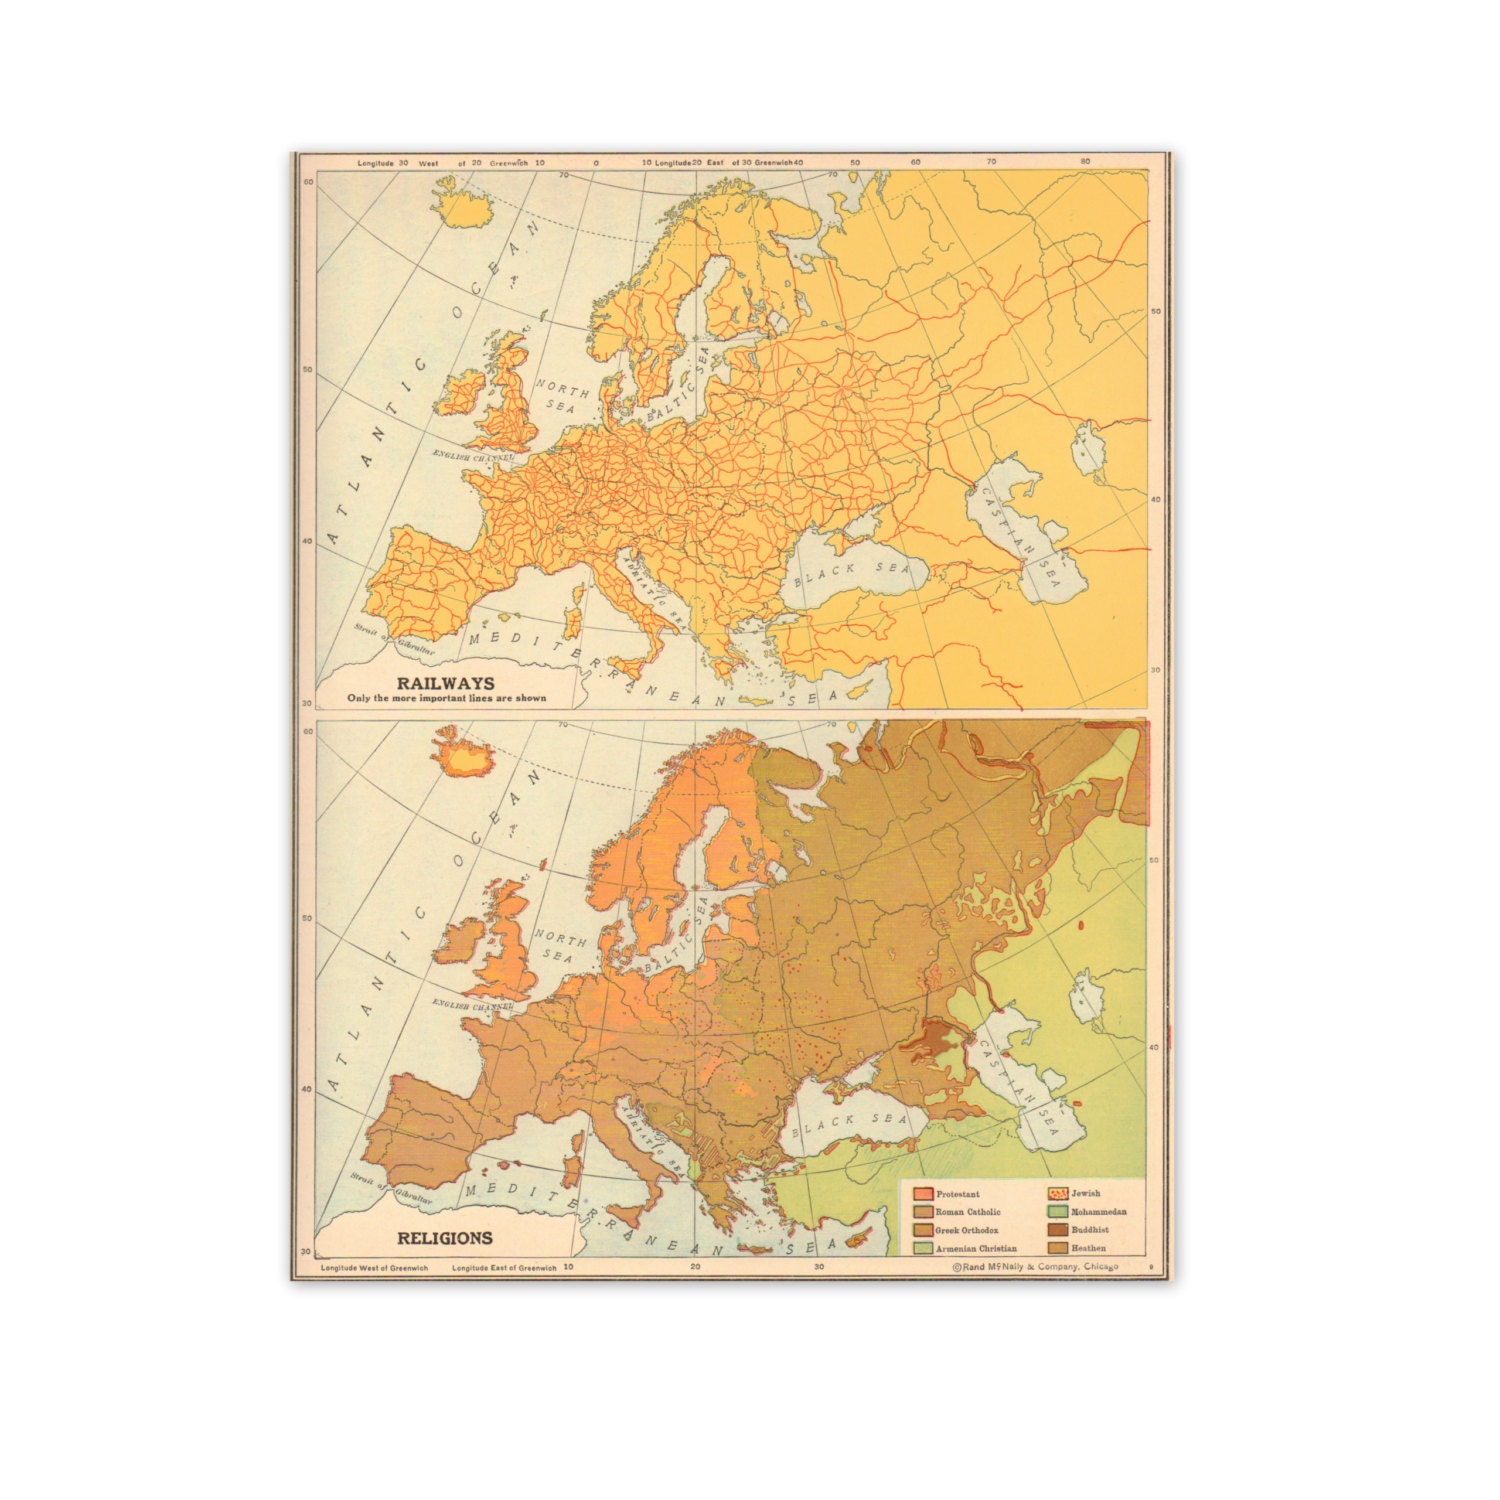 Vintage 1940s Map of European Railways and Religions. 8" x 10". Ready to Frame. (No. 806) - GraceArchives